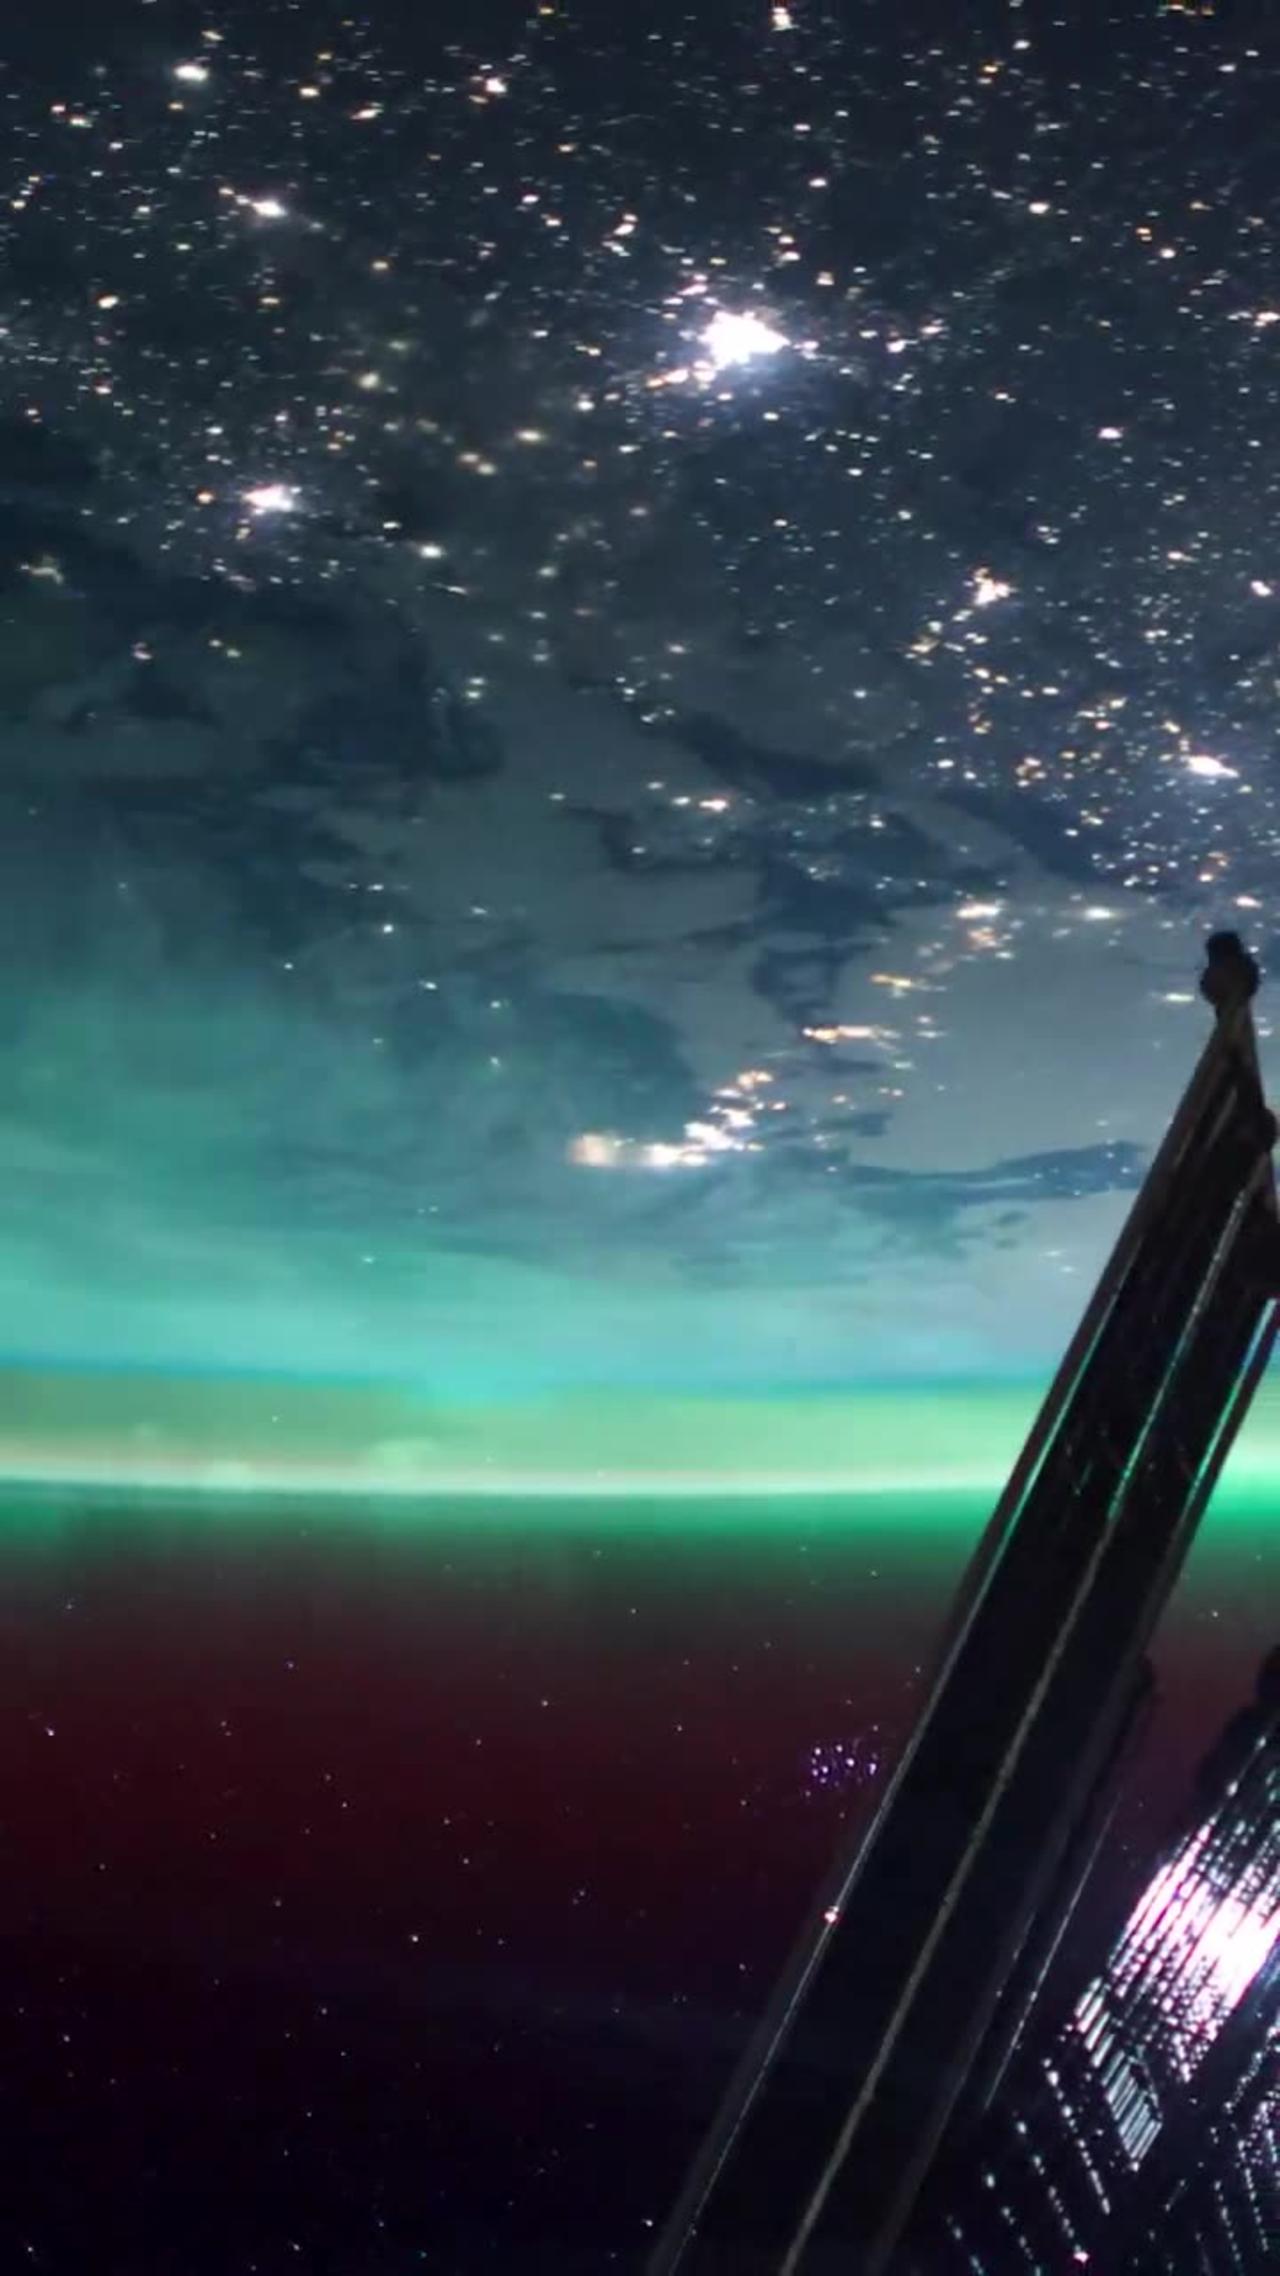 Northern light seen from the space station